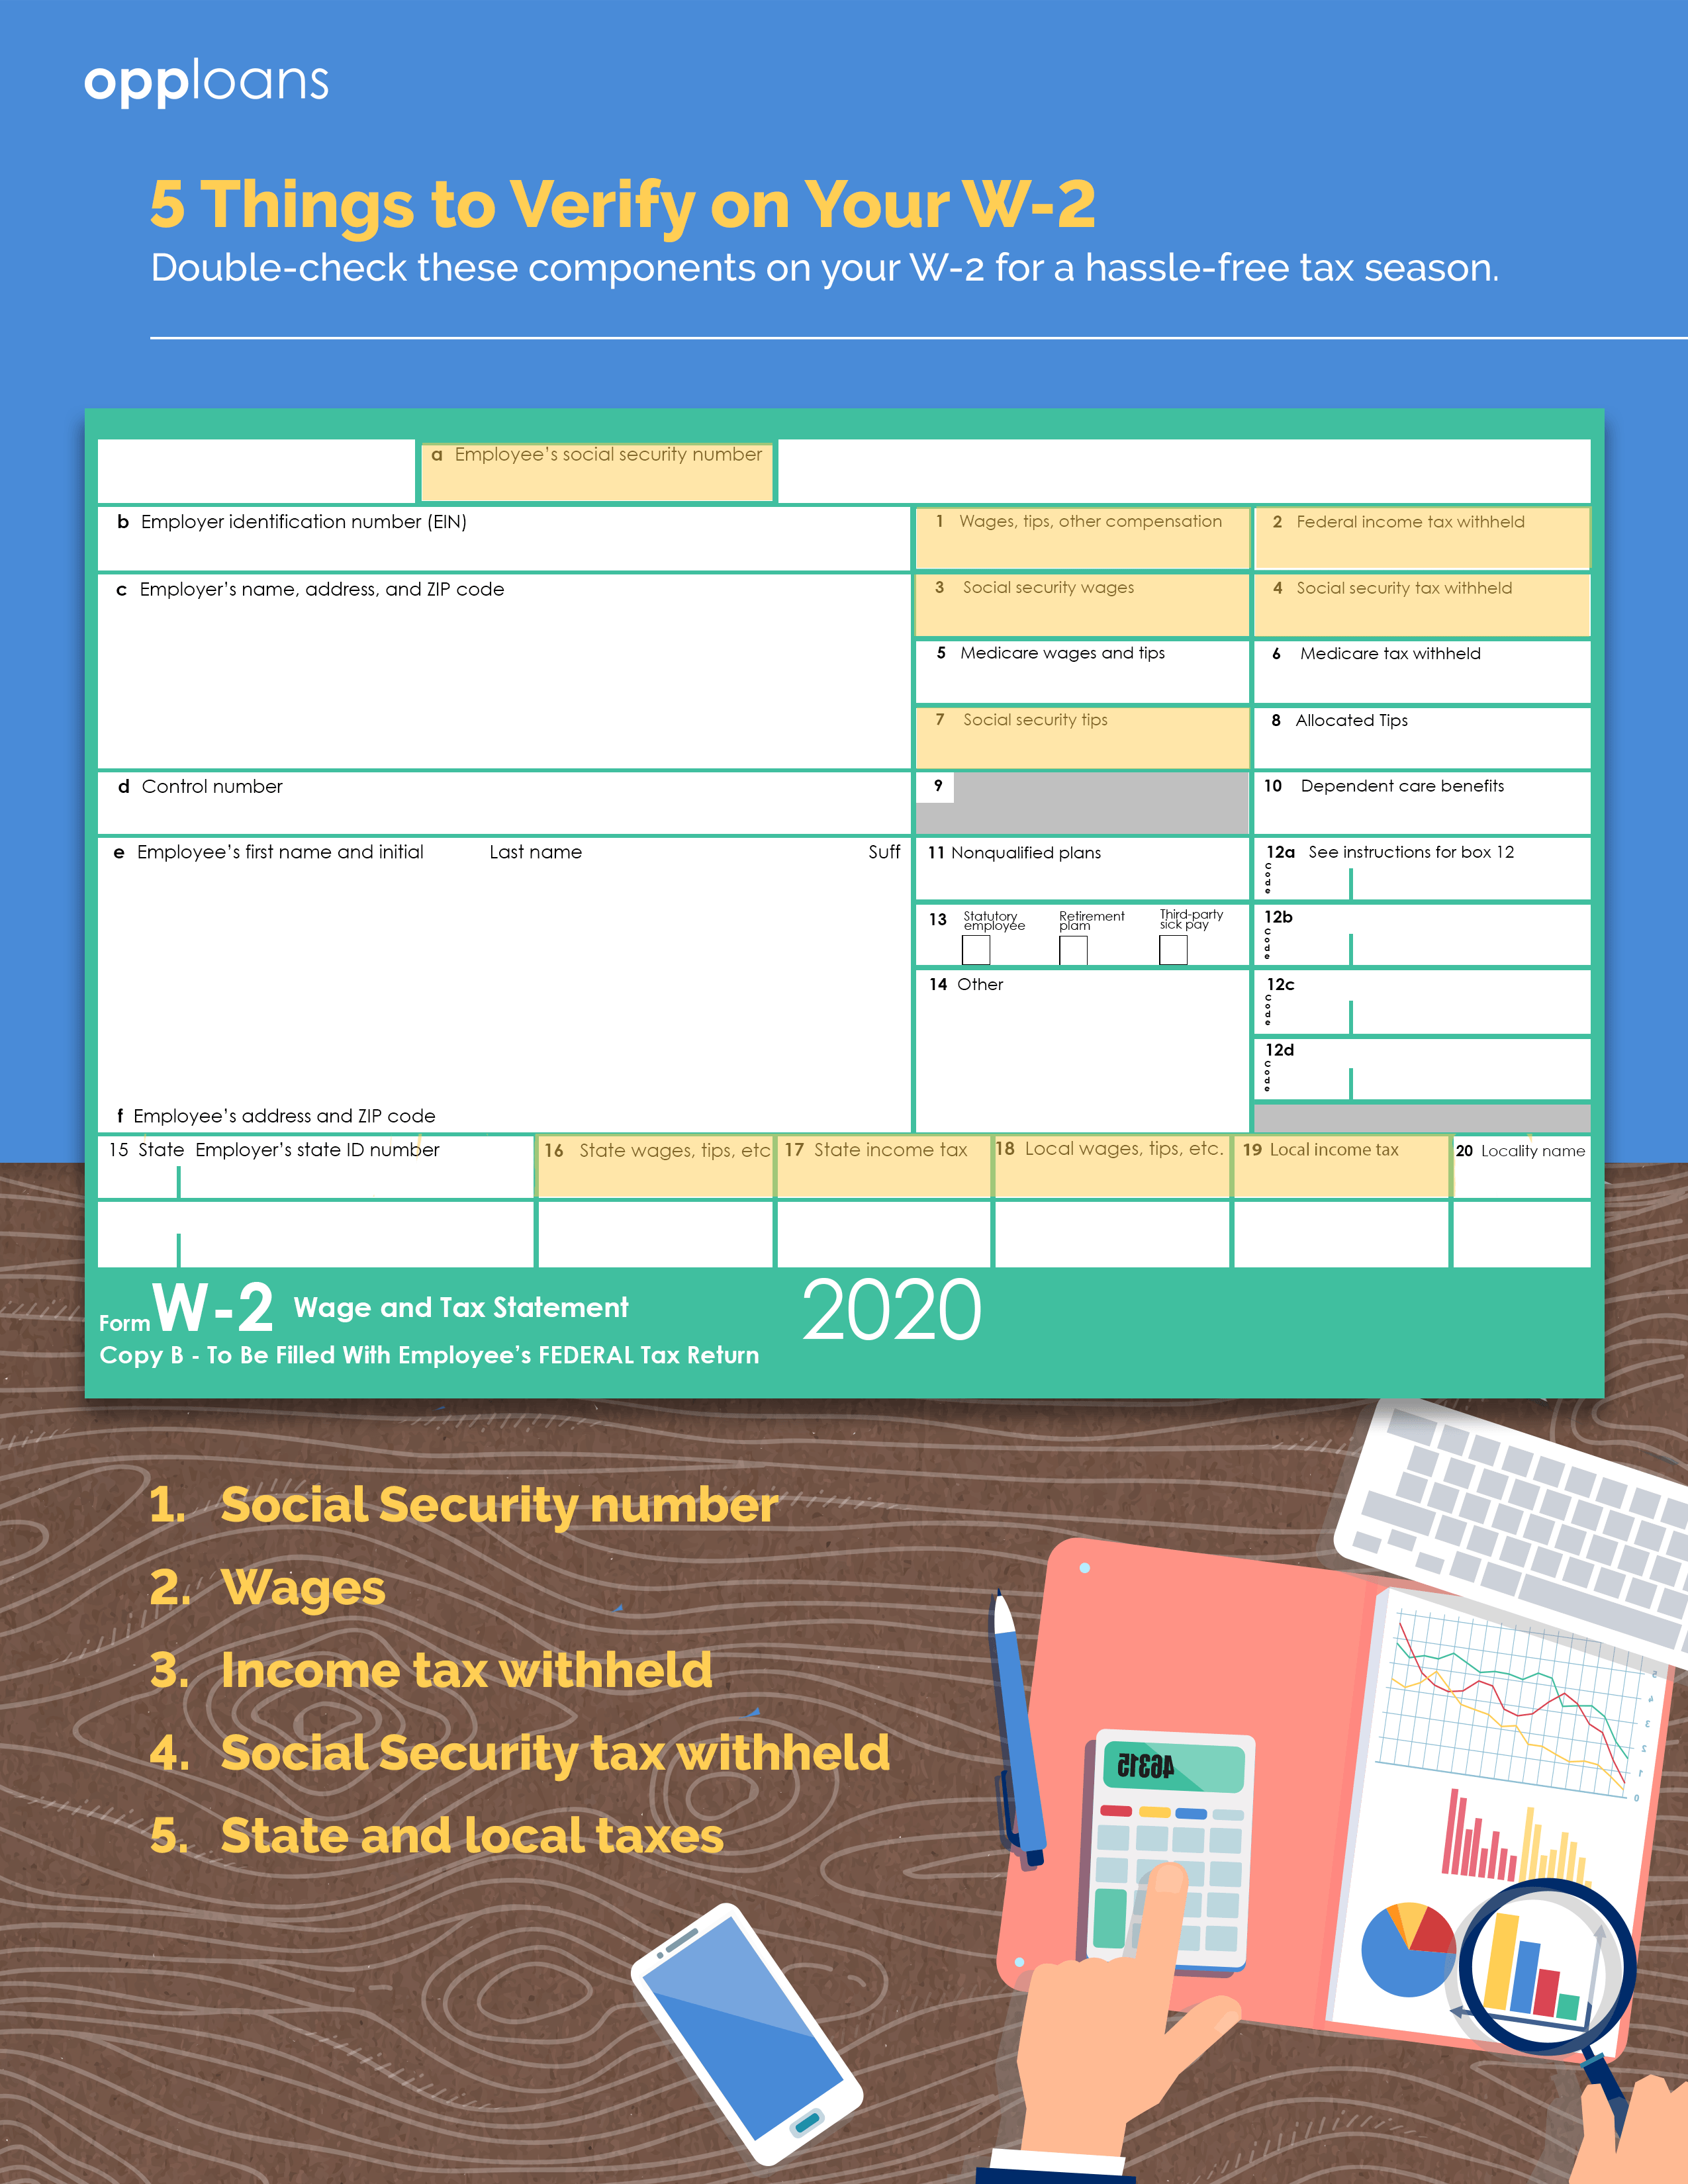 W-2 infographic witha list of 5 items to vet